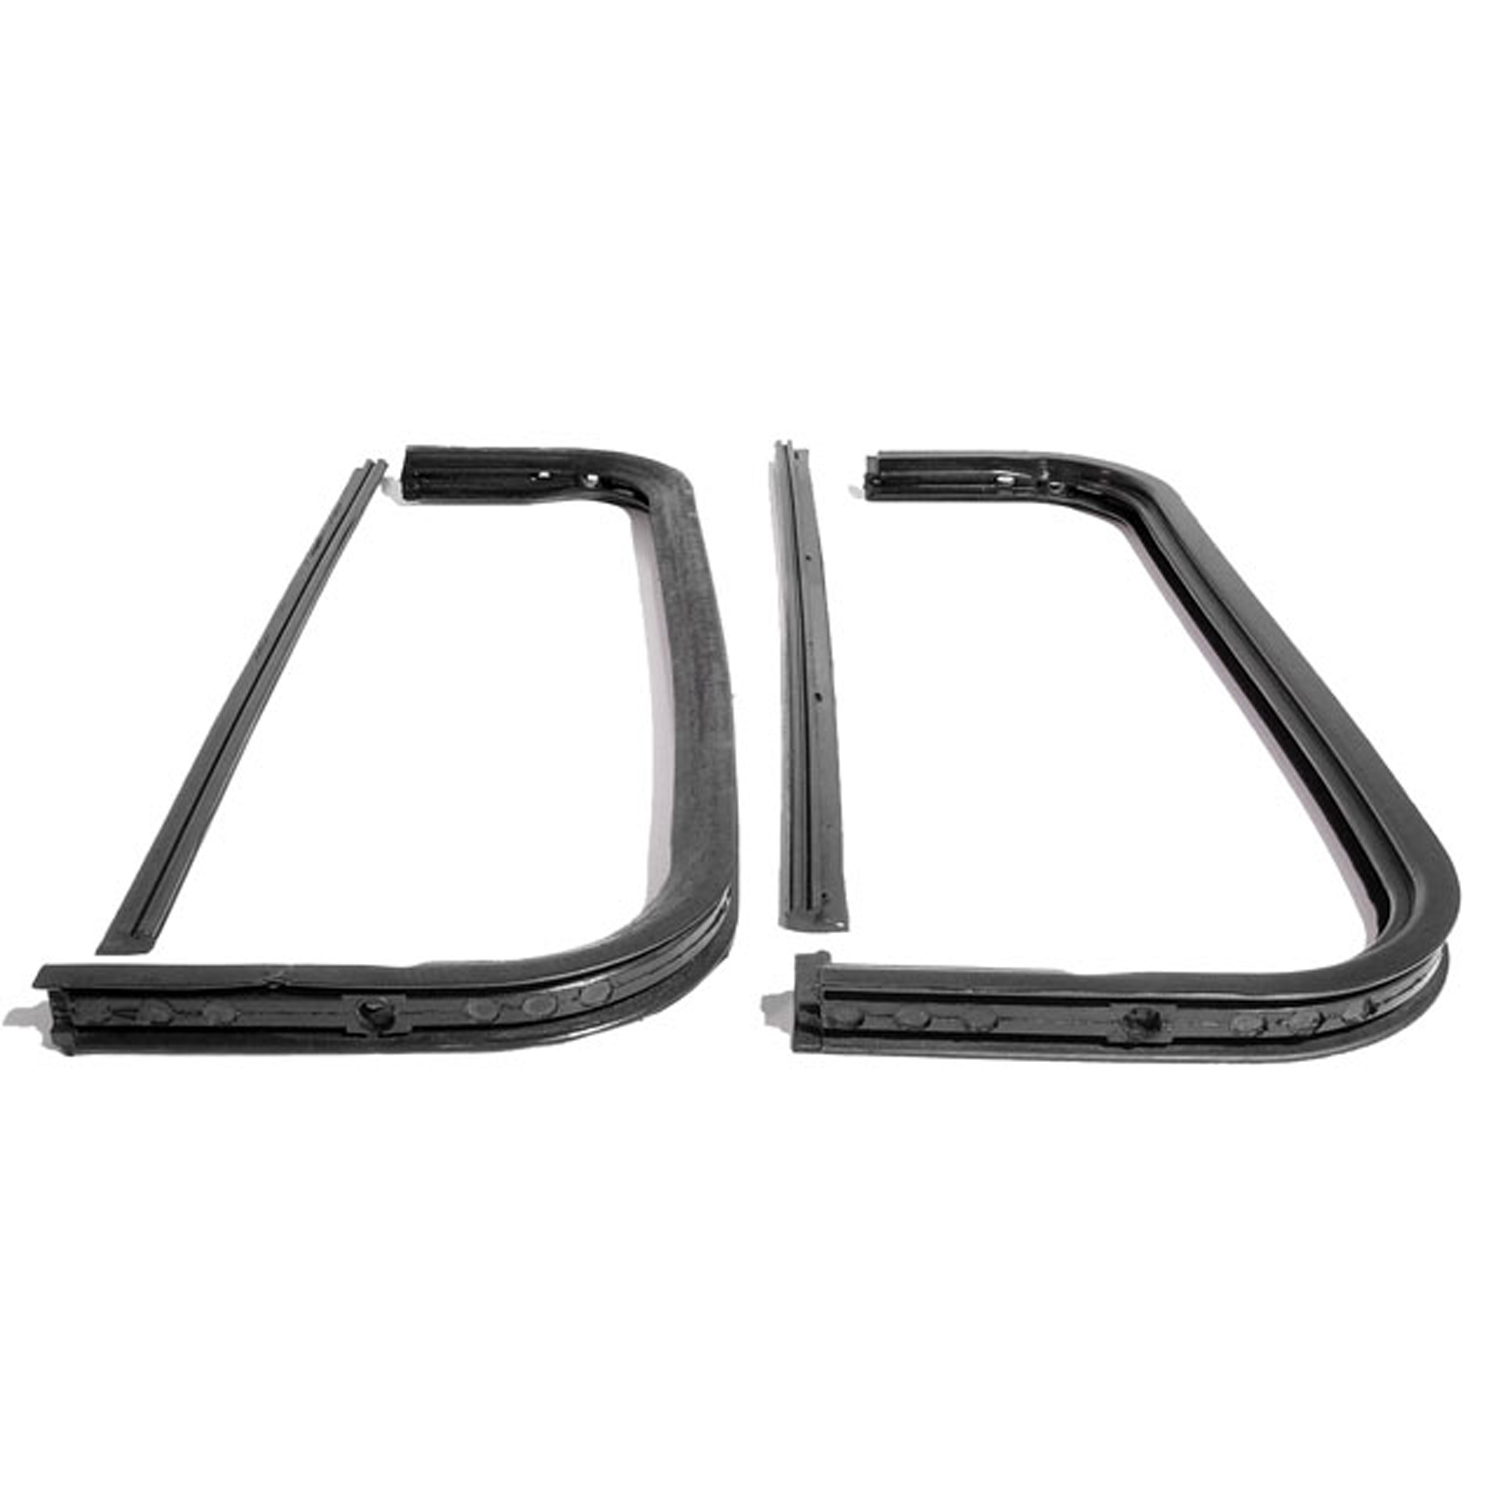 1962 Chevrolet K20 Pickup Vent Window Seals with Division Post Seals-WR 1900